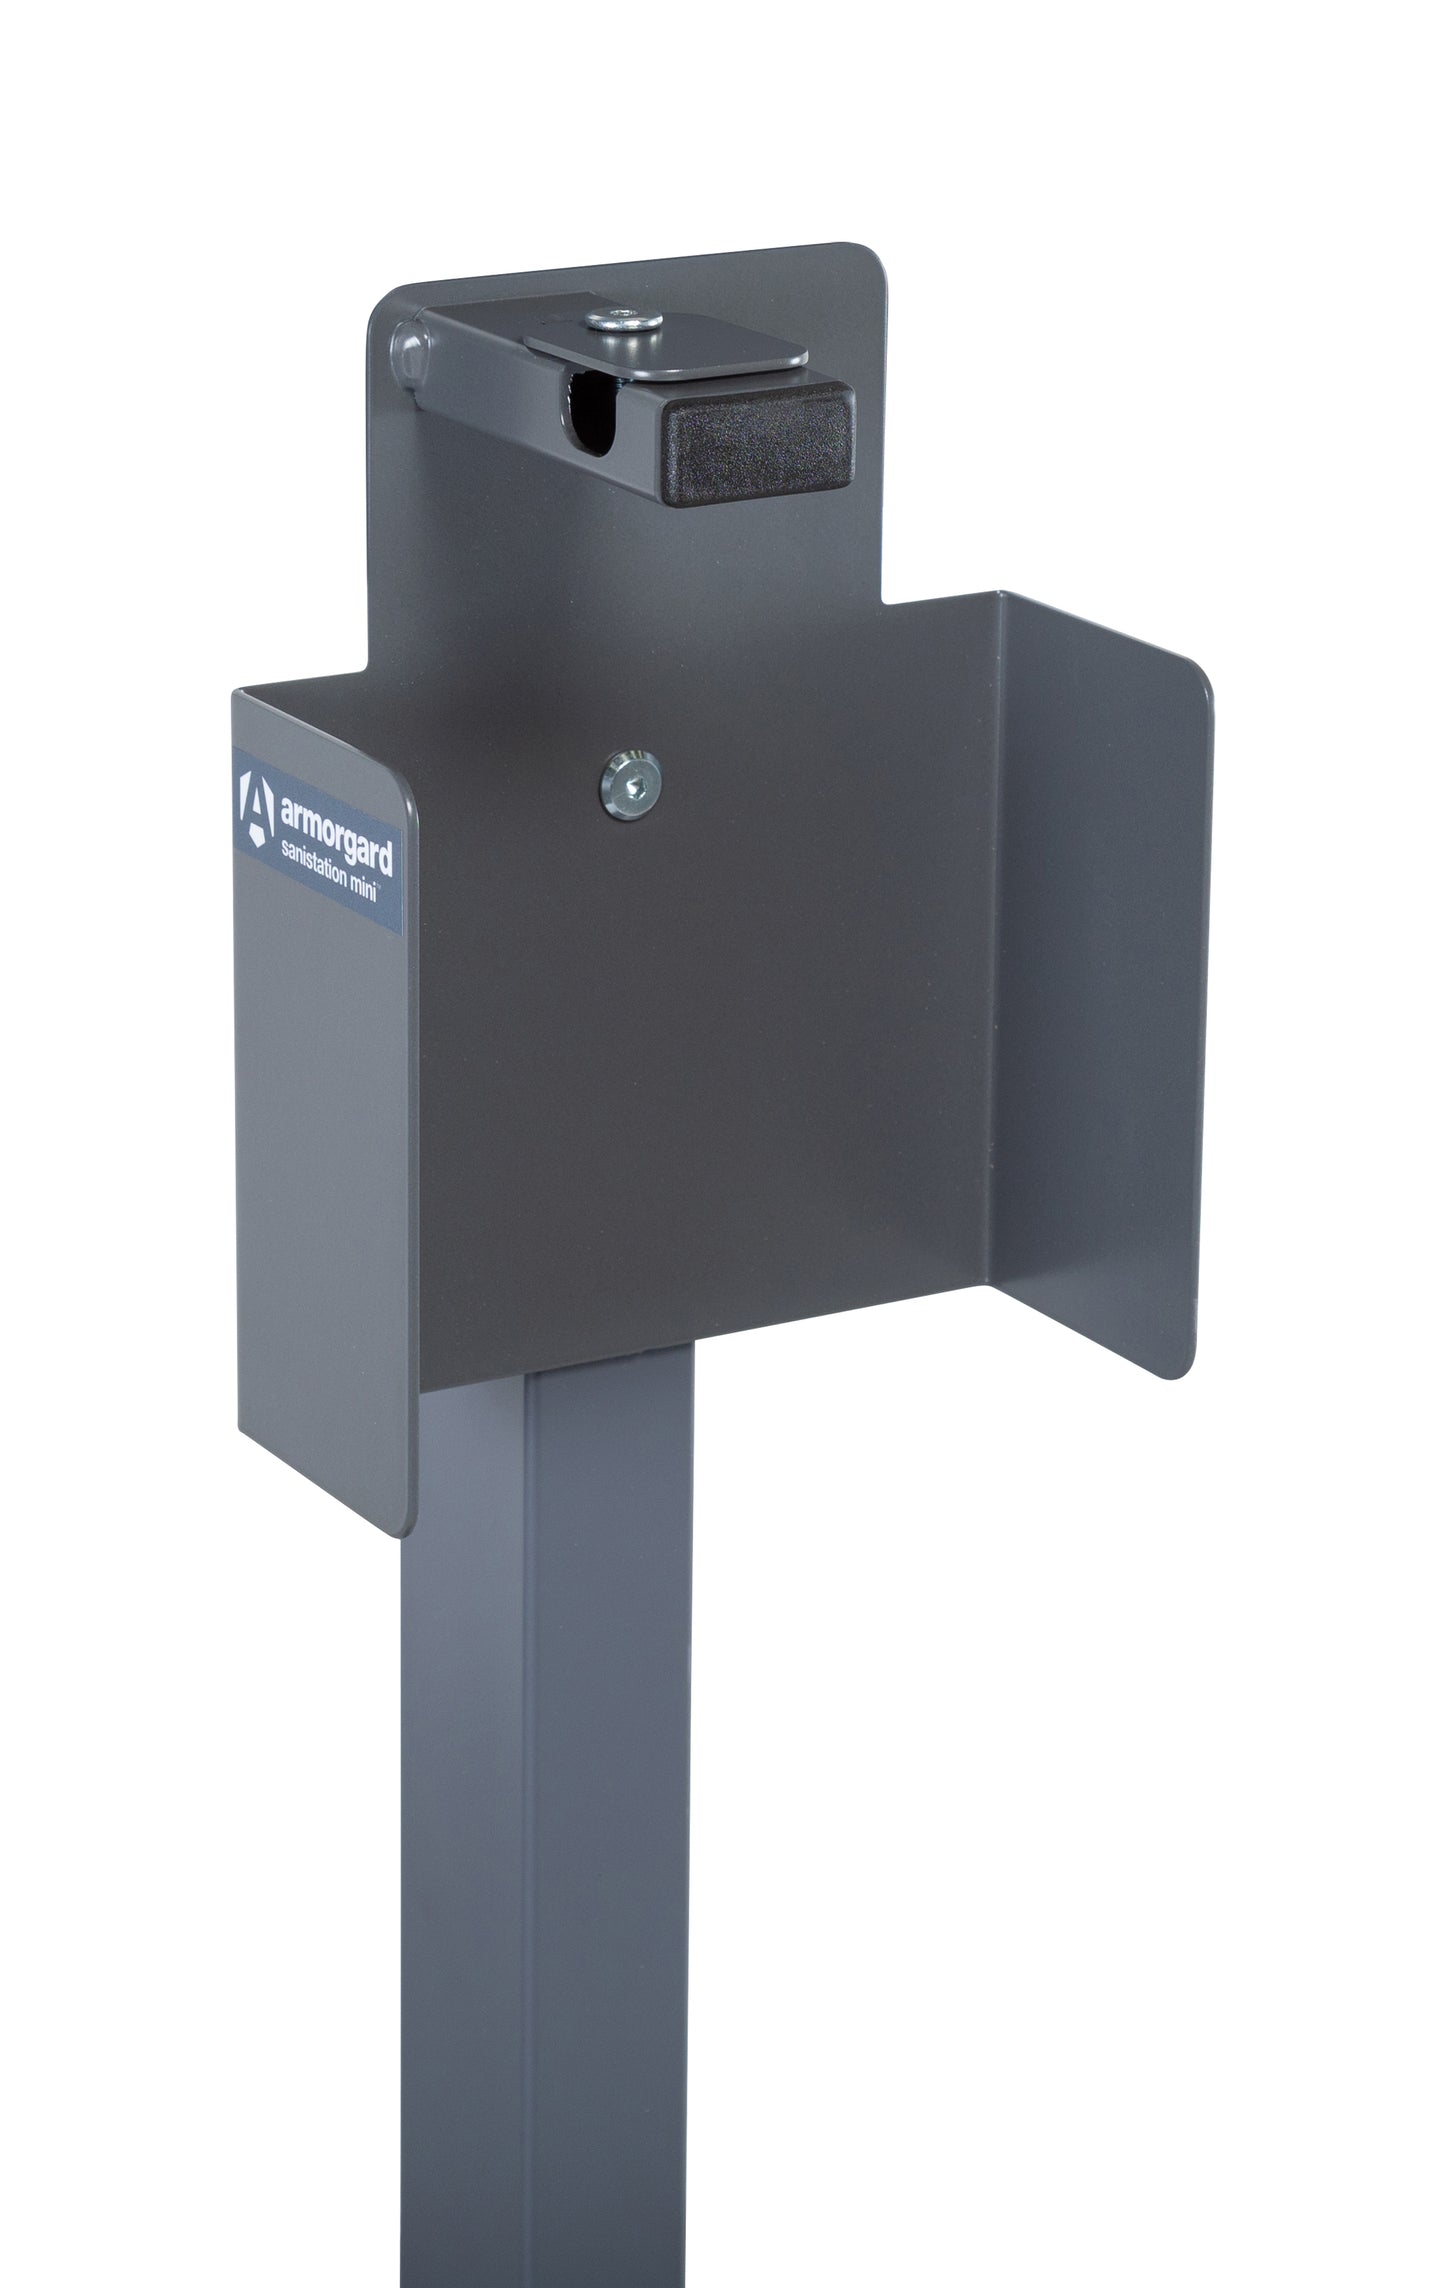 Armorgard - All Types Sanistation Site Cleaning Units mini, wallmounted to full units